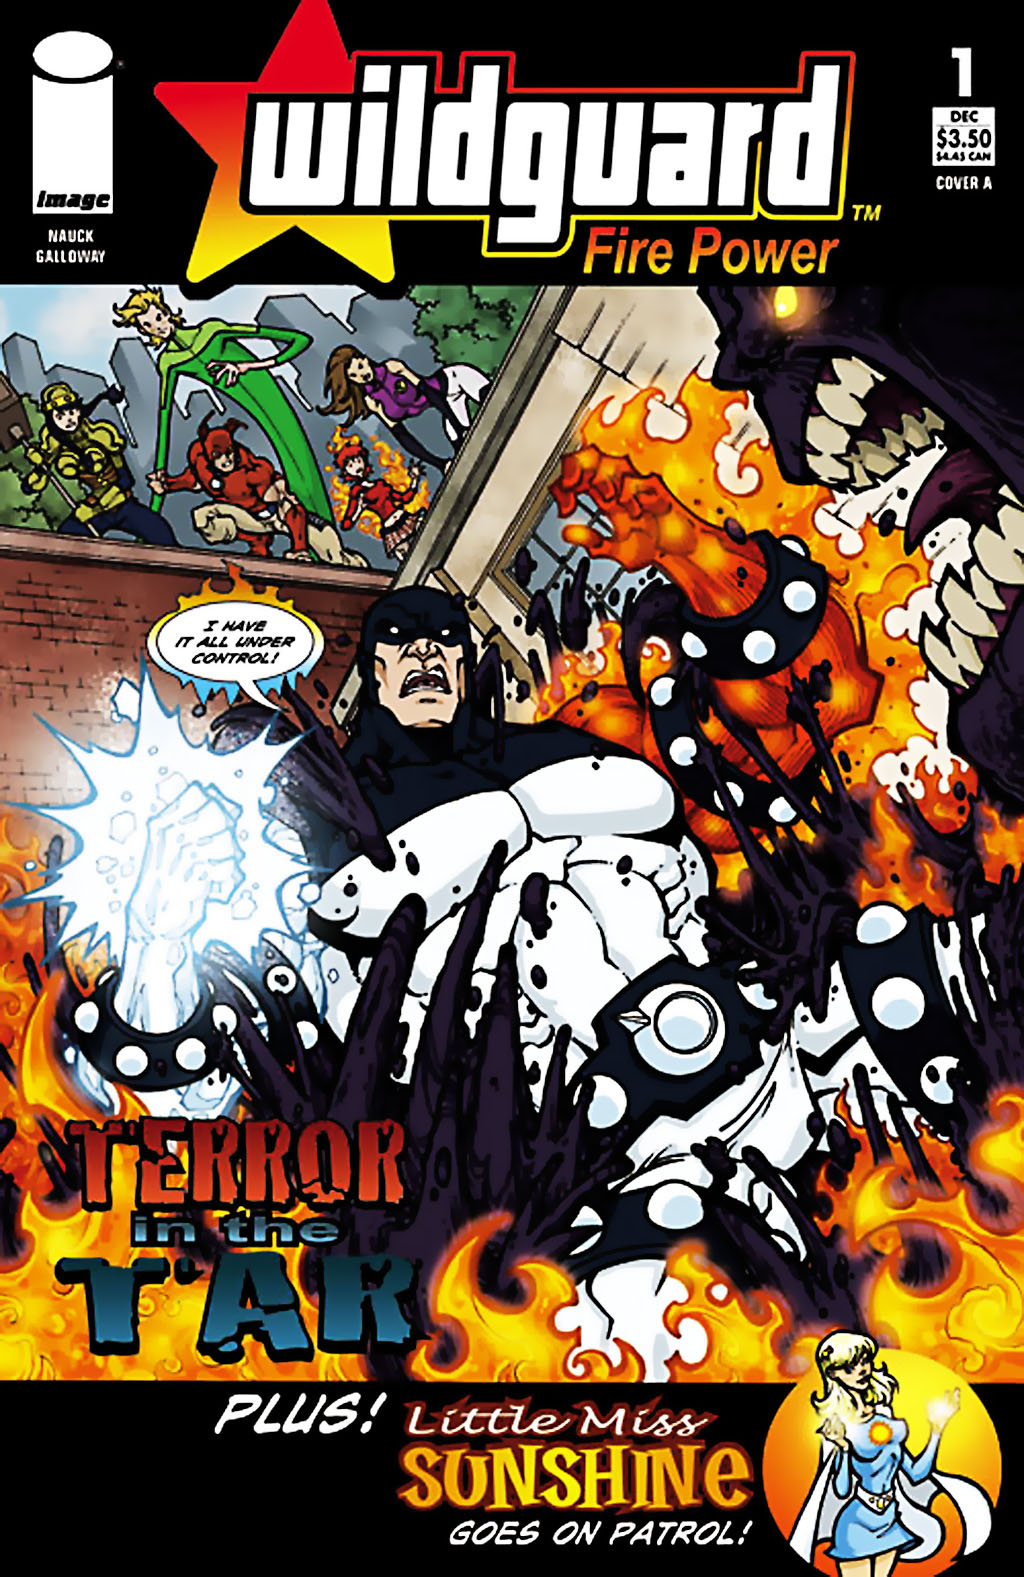 Read online Wildguard: Fire Power comic -  Issue # Full - 1